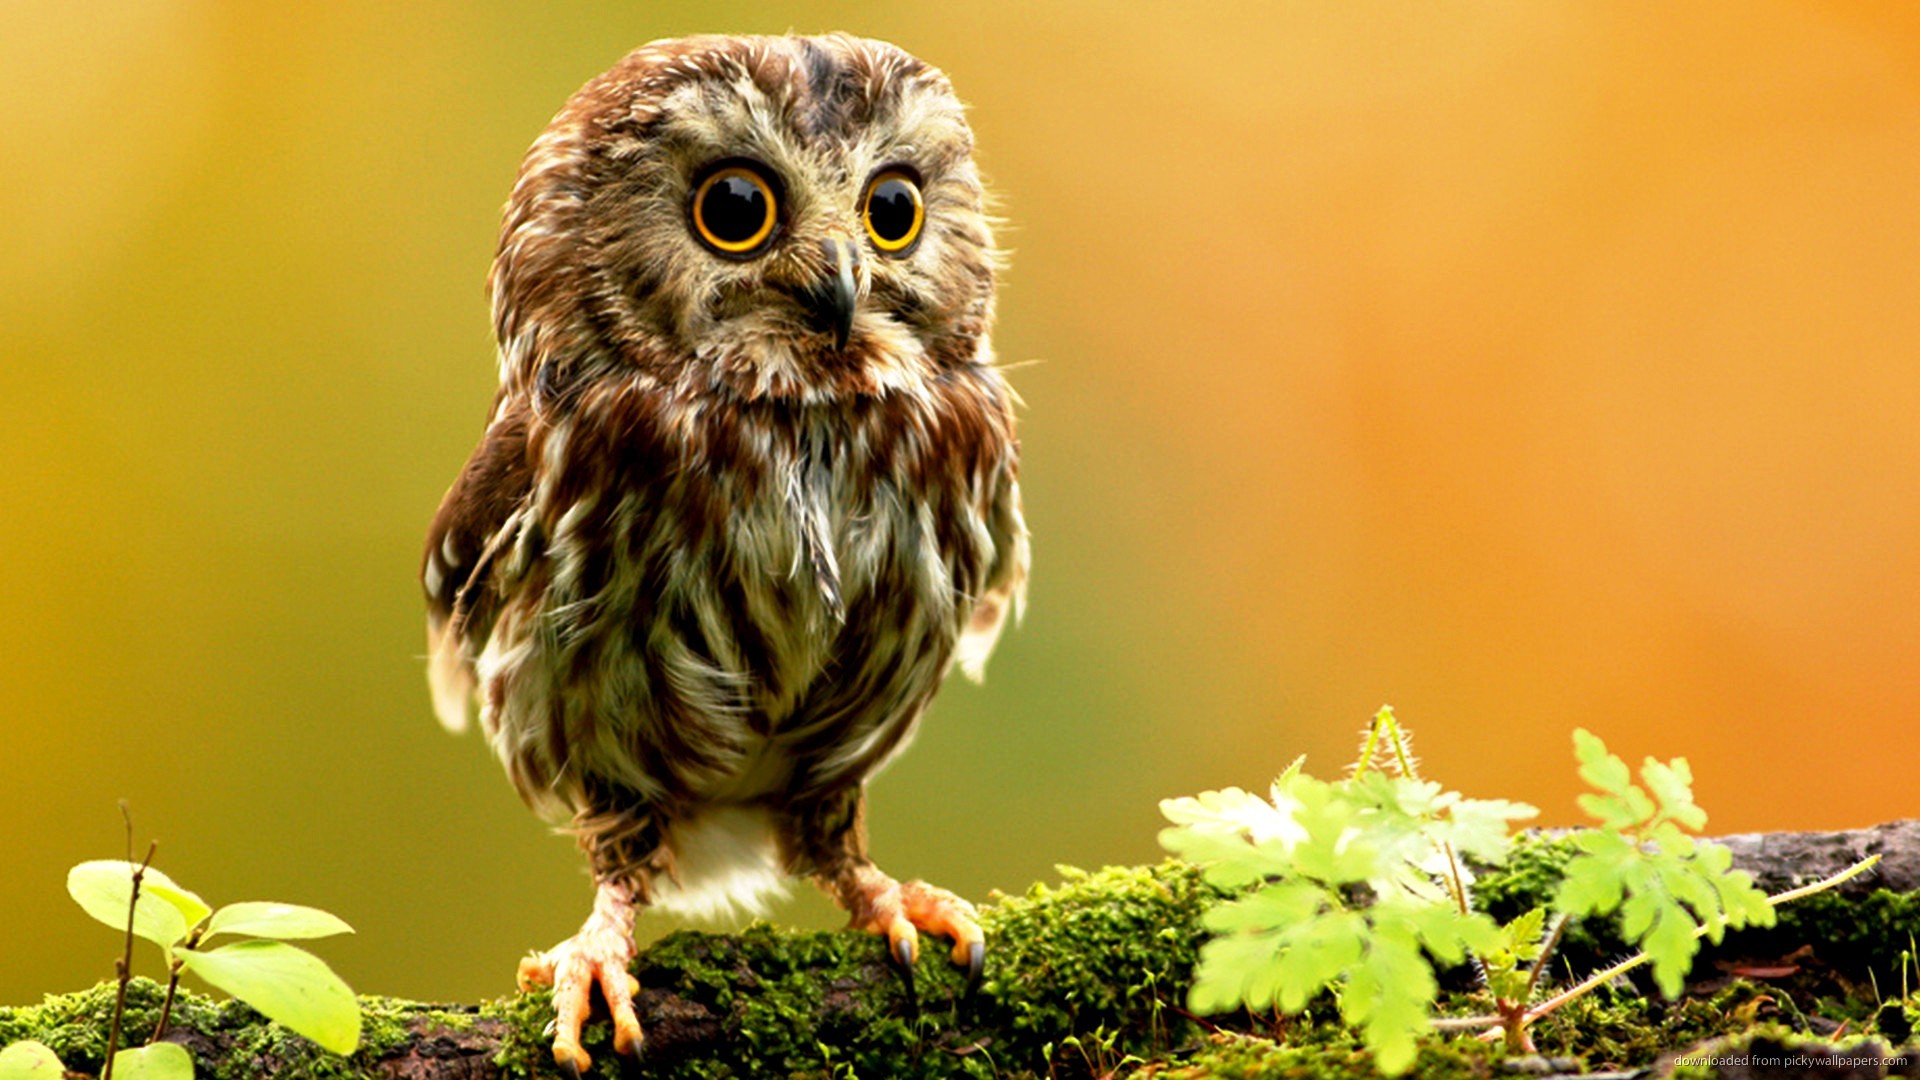 1920x1080 11 Awesome And Cute Animal Wallpapers - HD Wallpapers